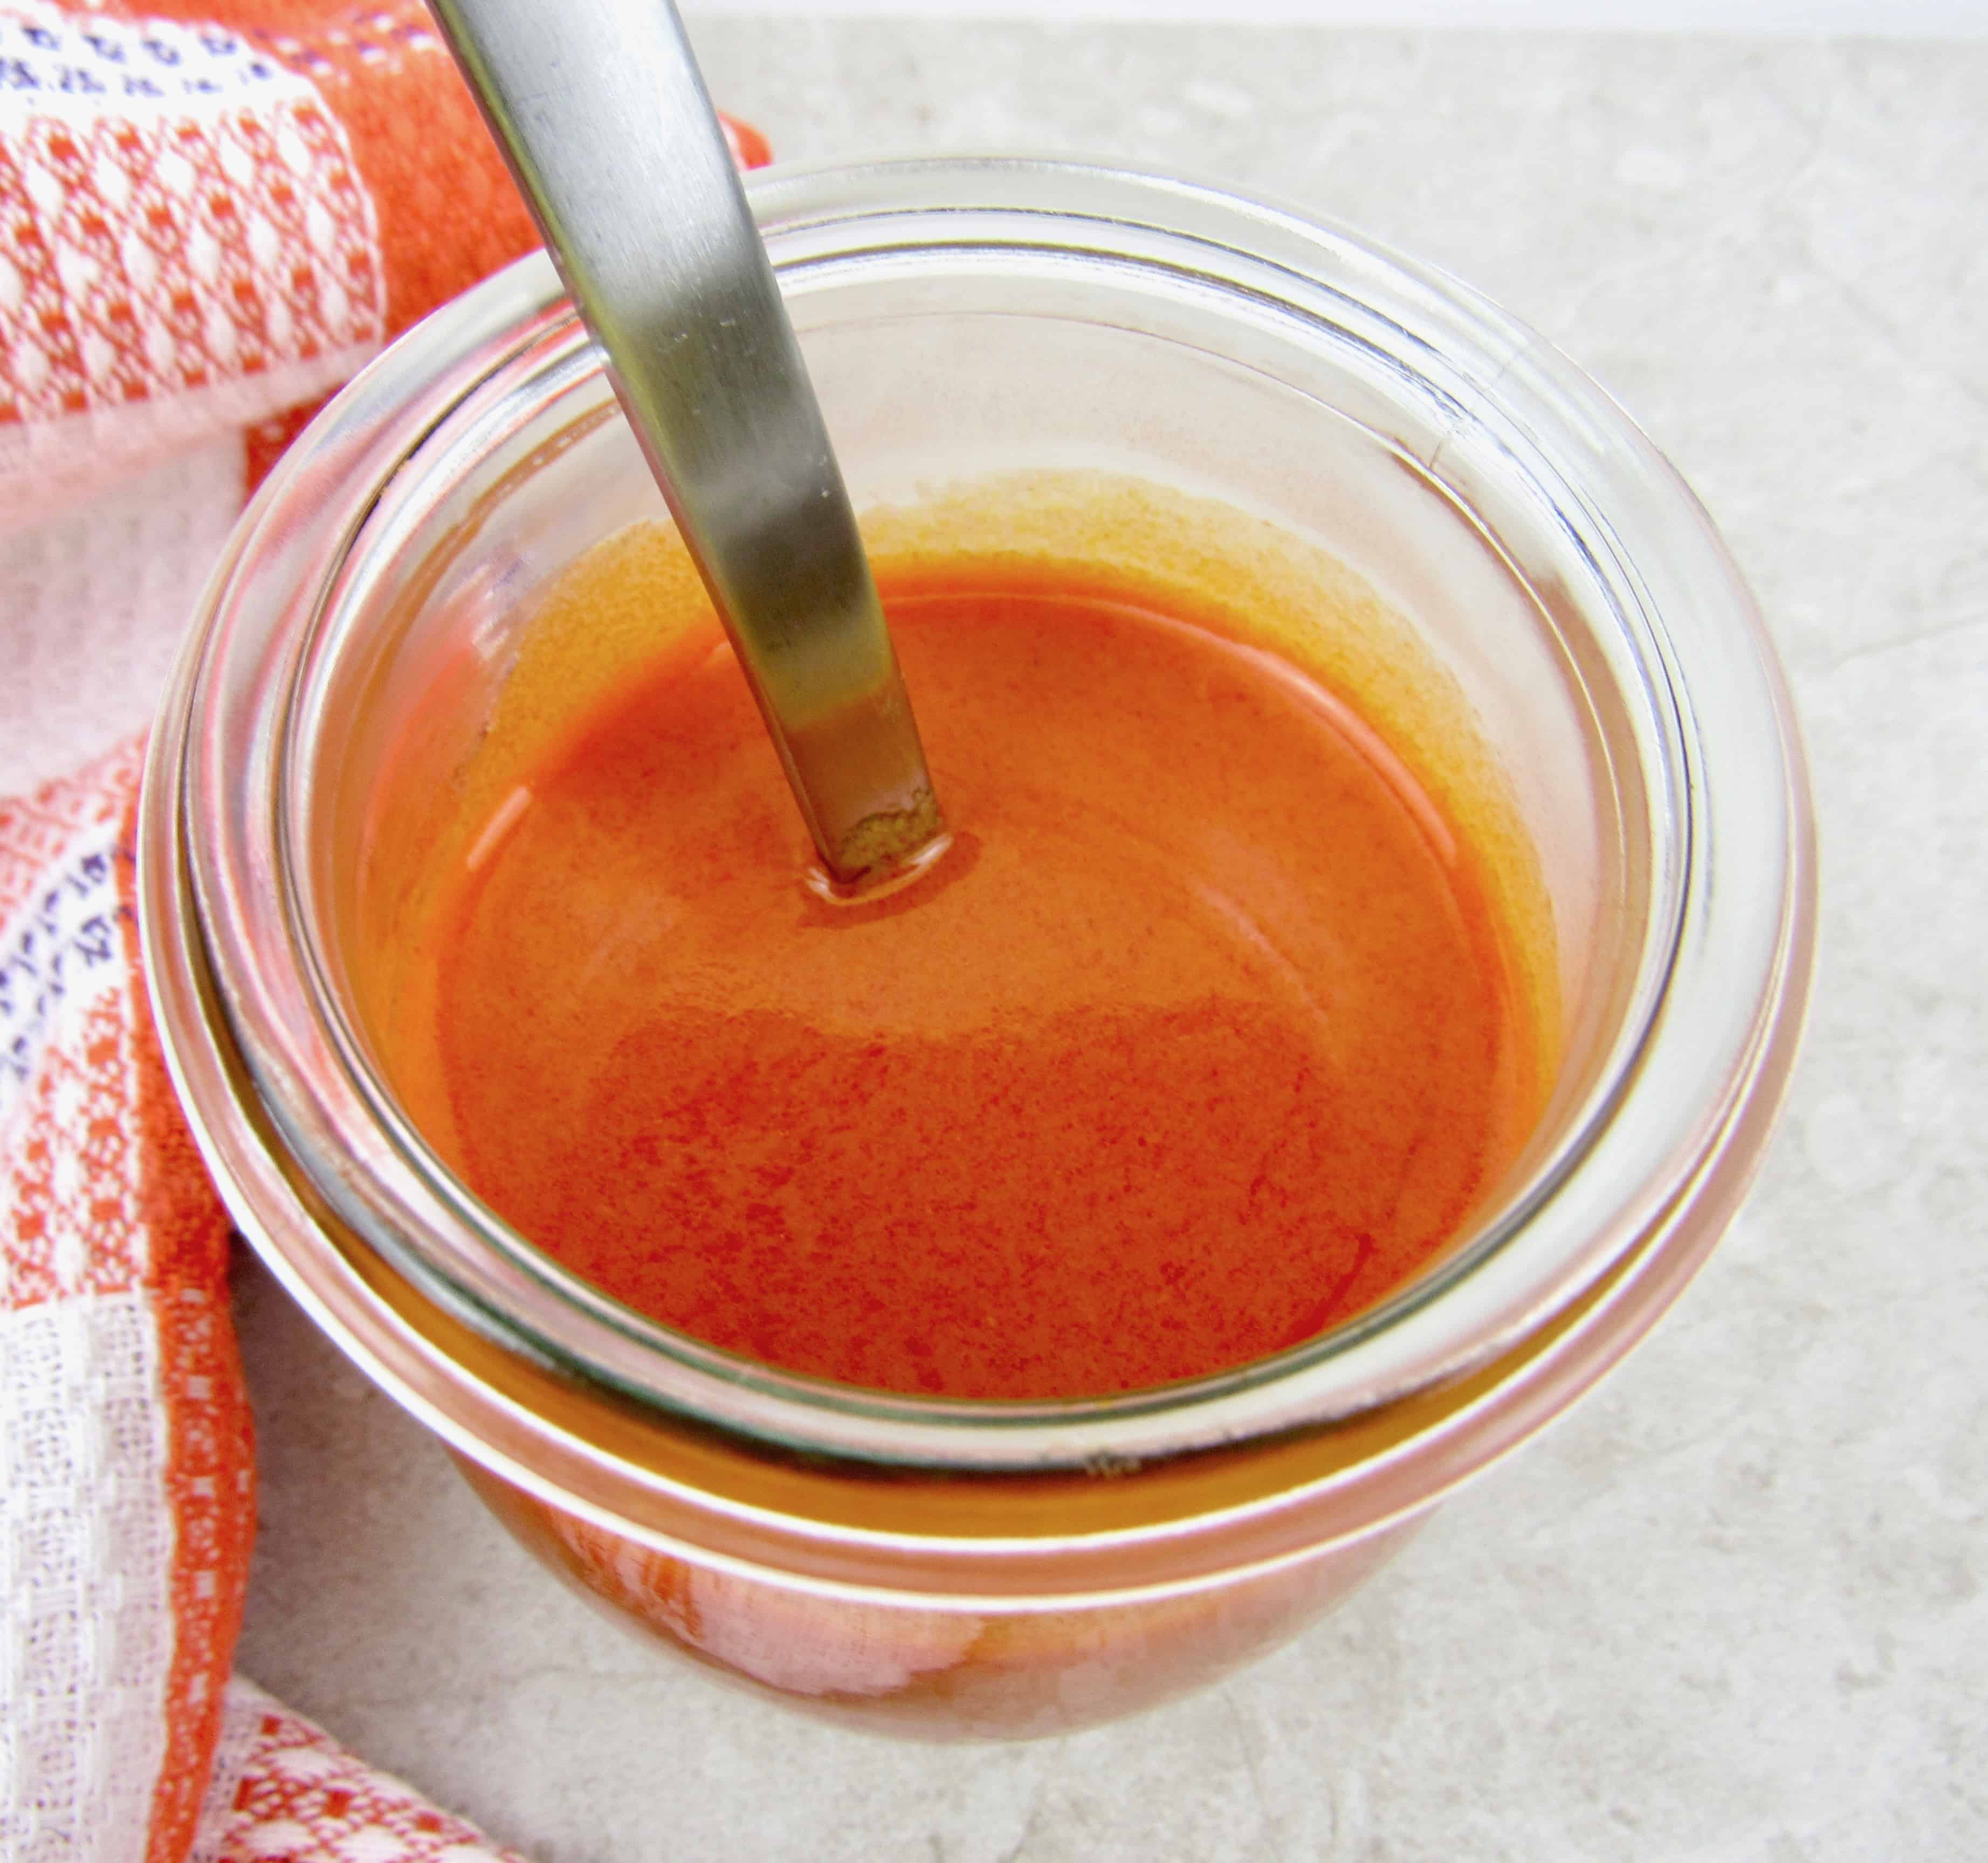 Homemade Buffalo Wing Sauce - Keto and Low Carb